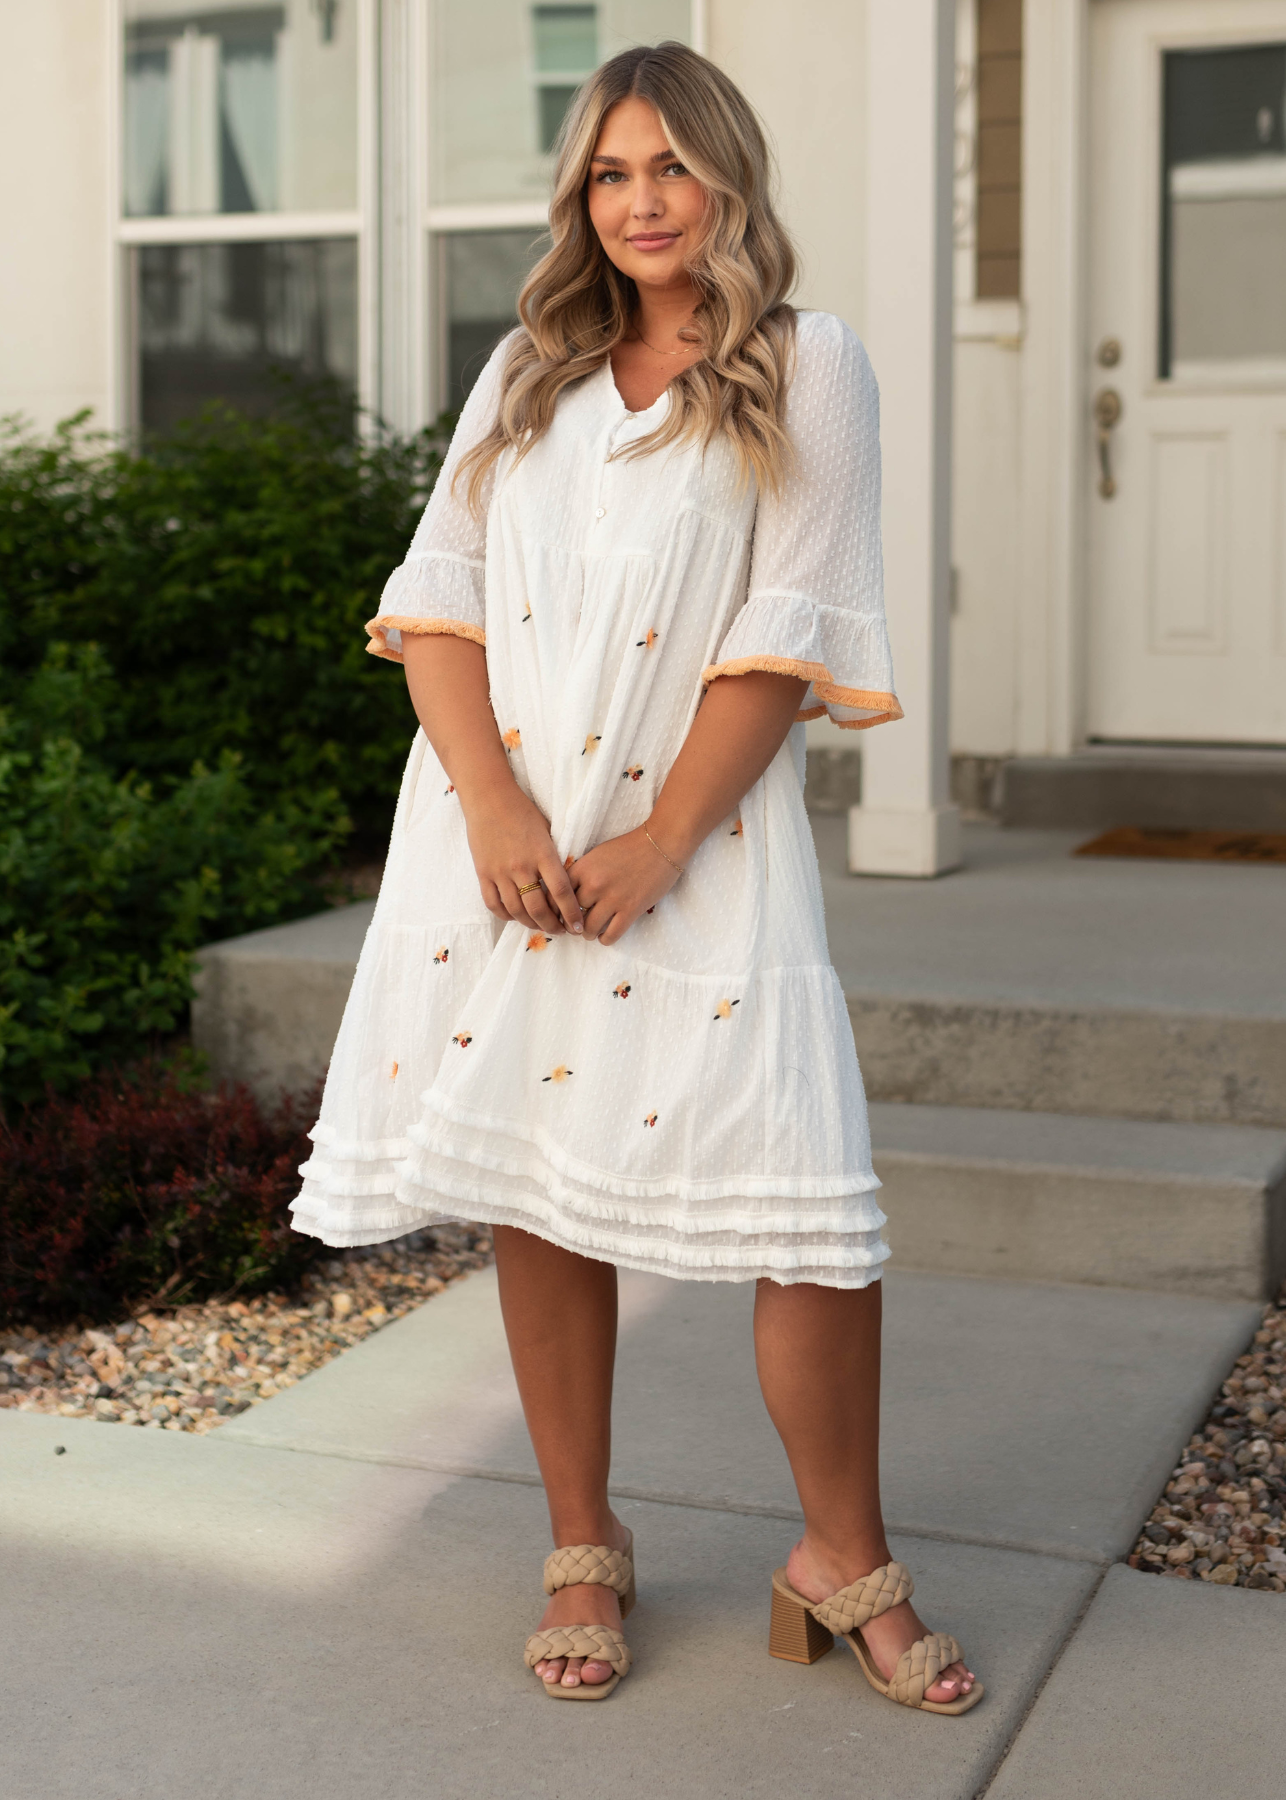 White dress with peach trim on sleeves